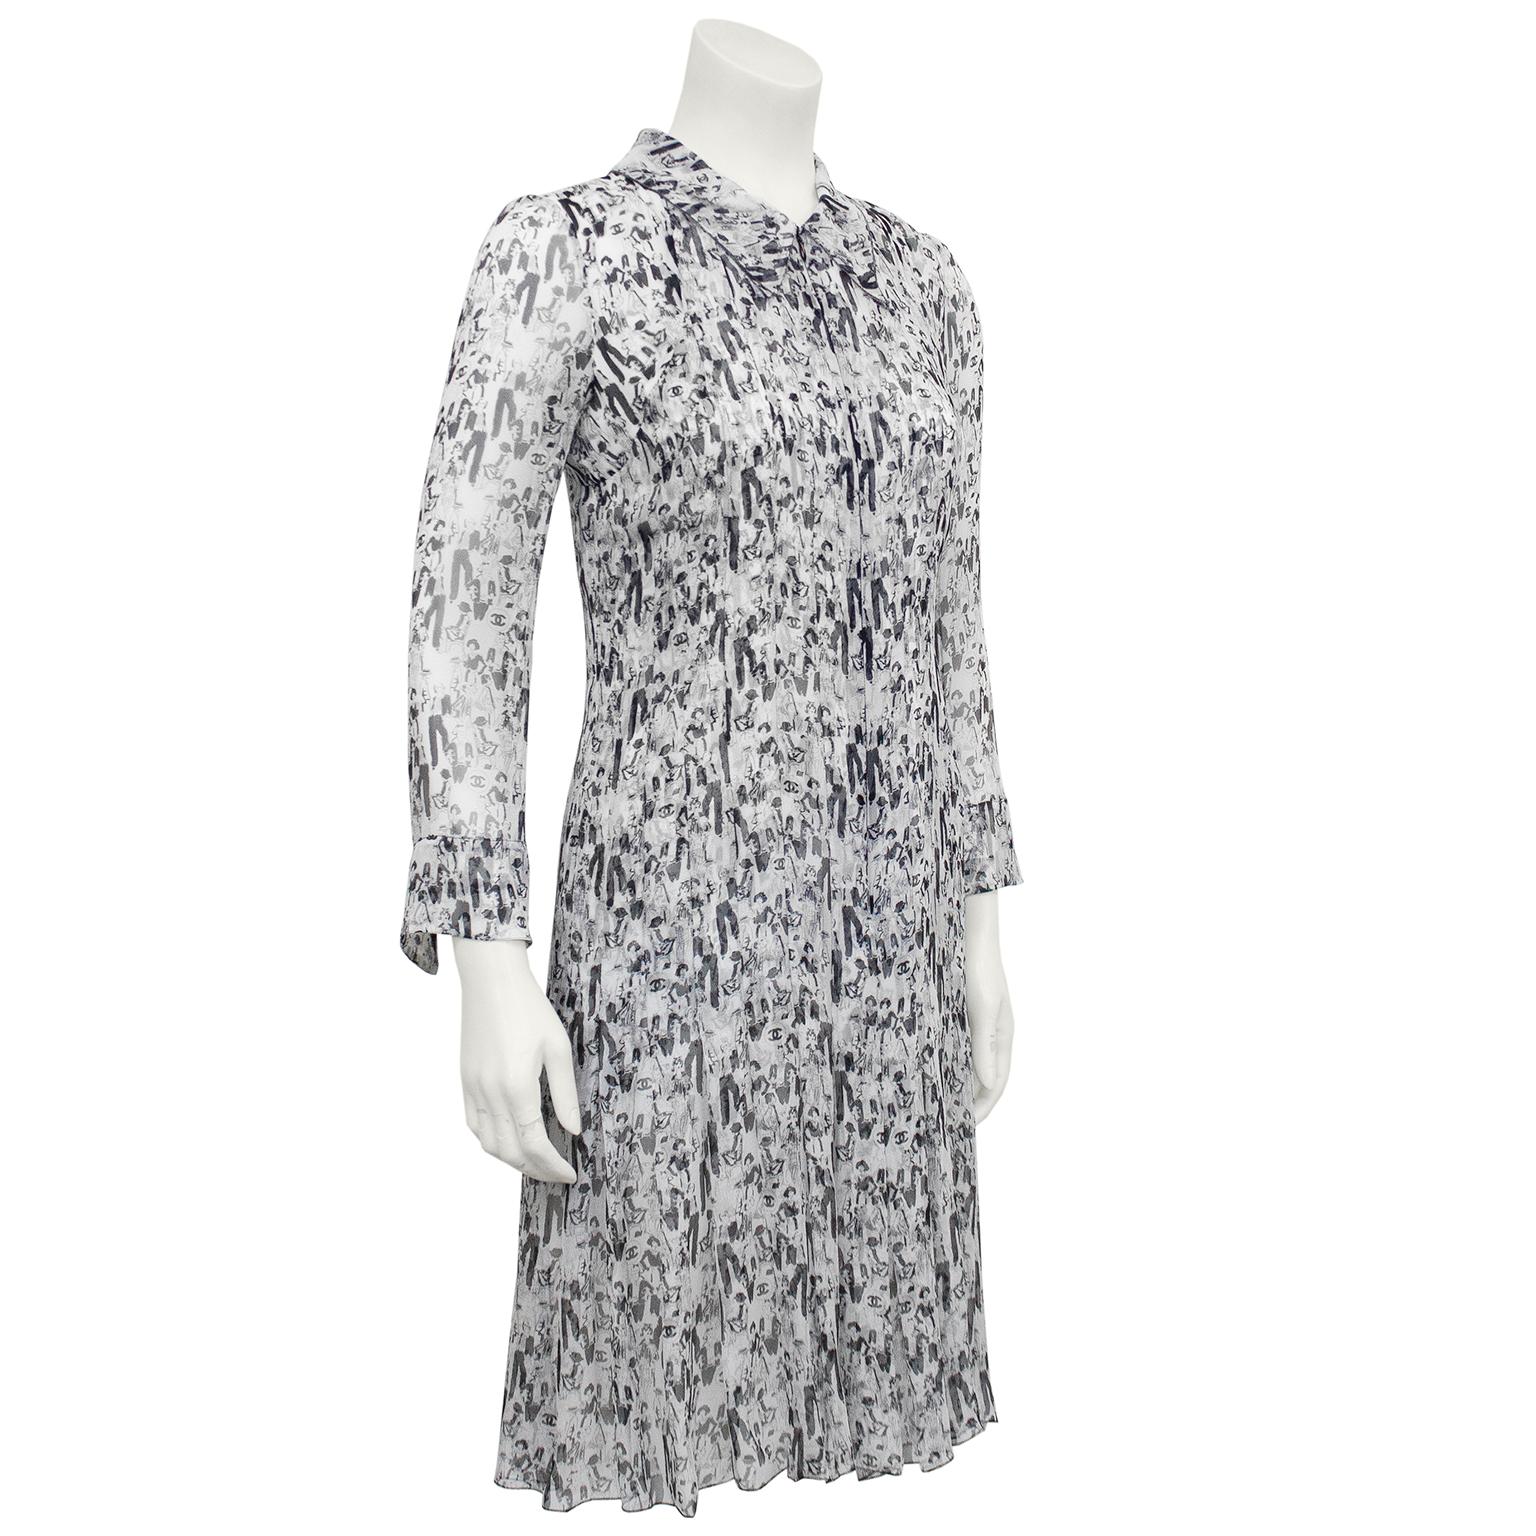 Stunning Chanel shirtdress from the Spring 2003 collection. Black and white 100% silk chiffon with an all over print of Coco Chanel in different classic and iconic Chanel outfits and the CC logo throughout. Long sheer sleeves, convertible collar and